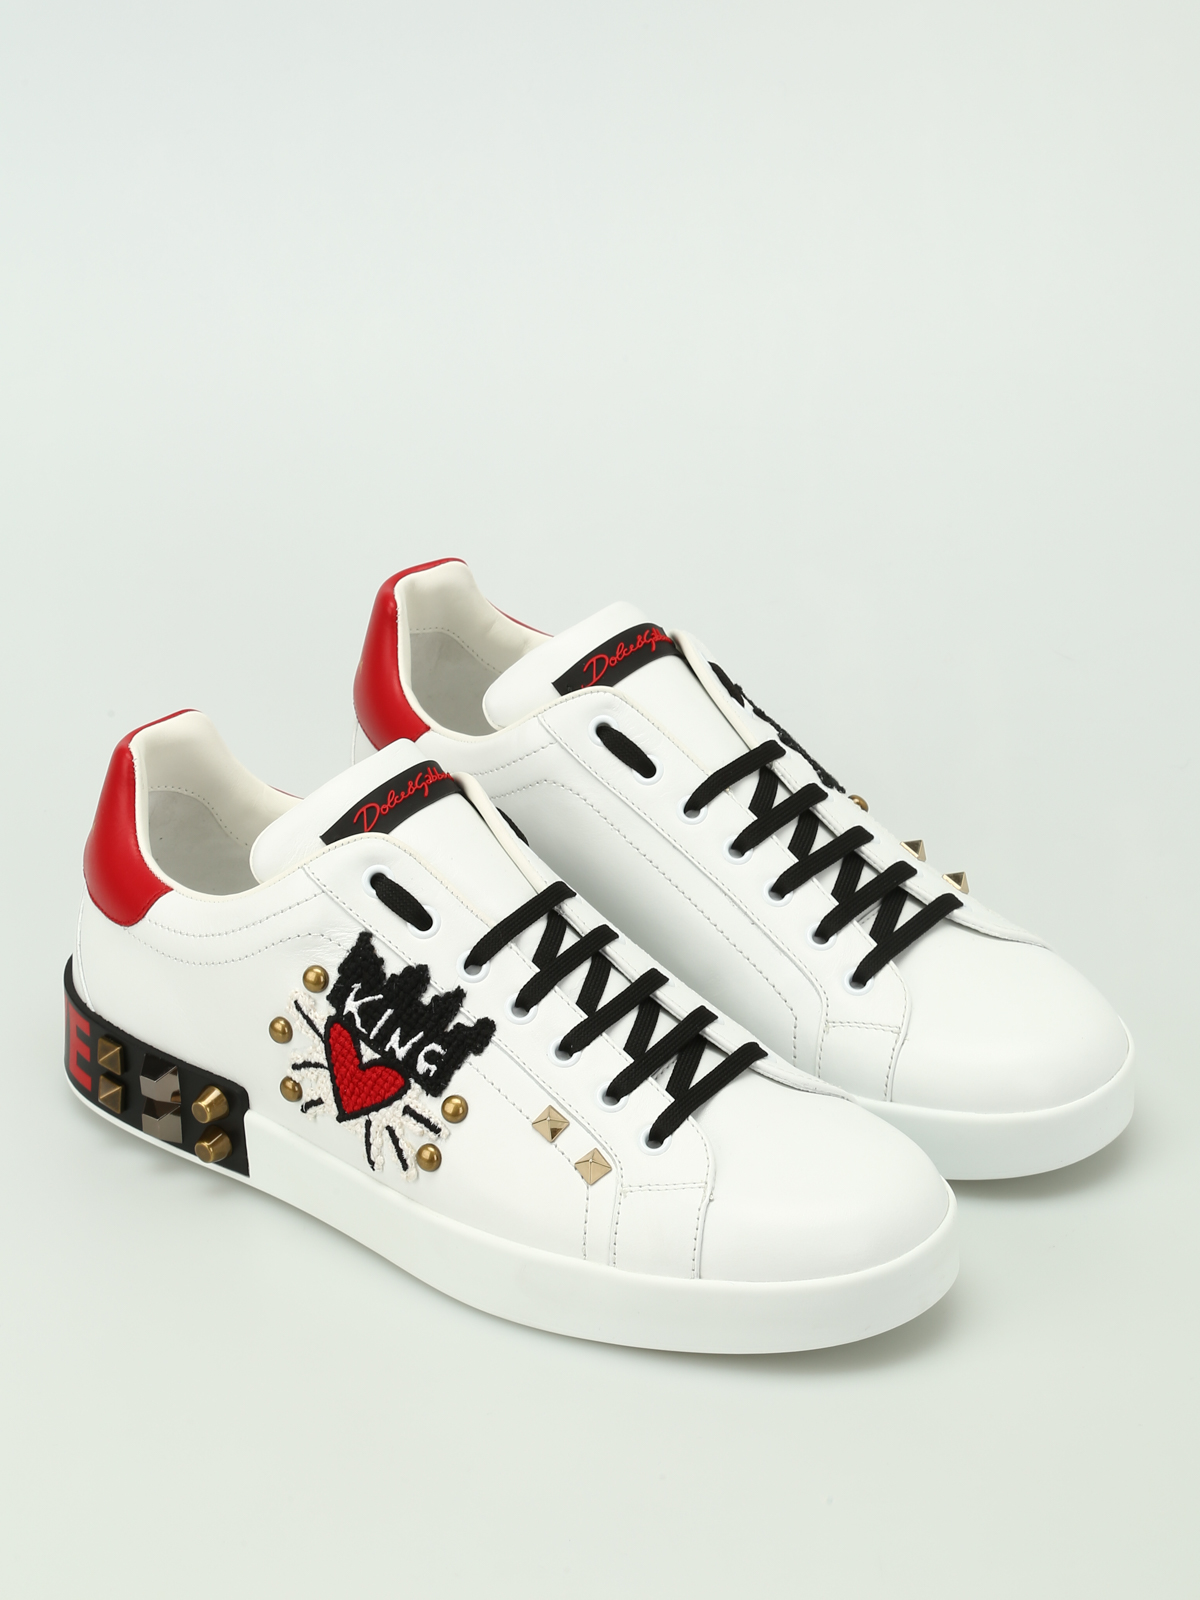 King of Love leather sneakers by Dolce & Gabbana - trainers | iKRIX